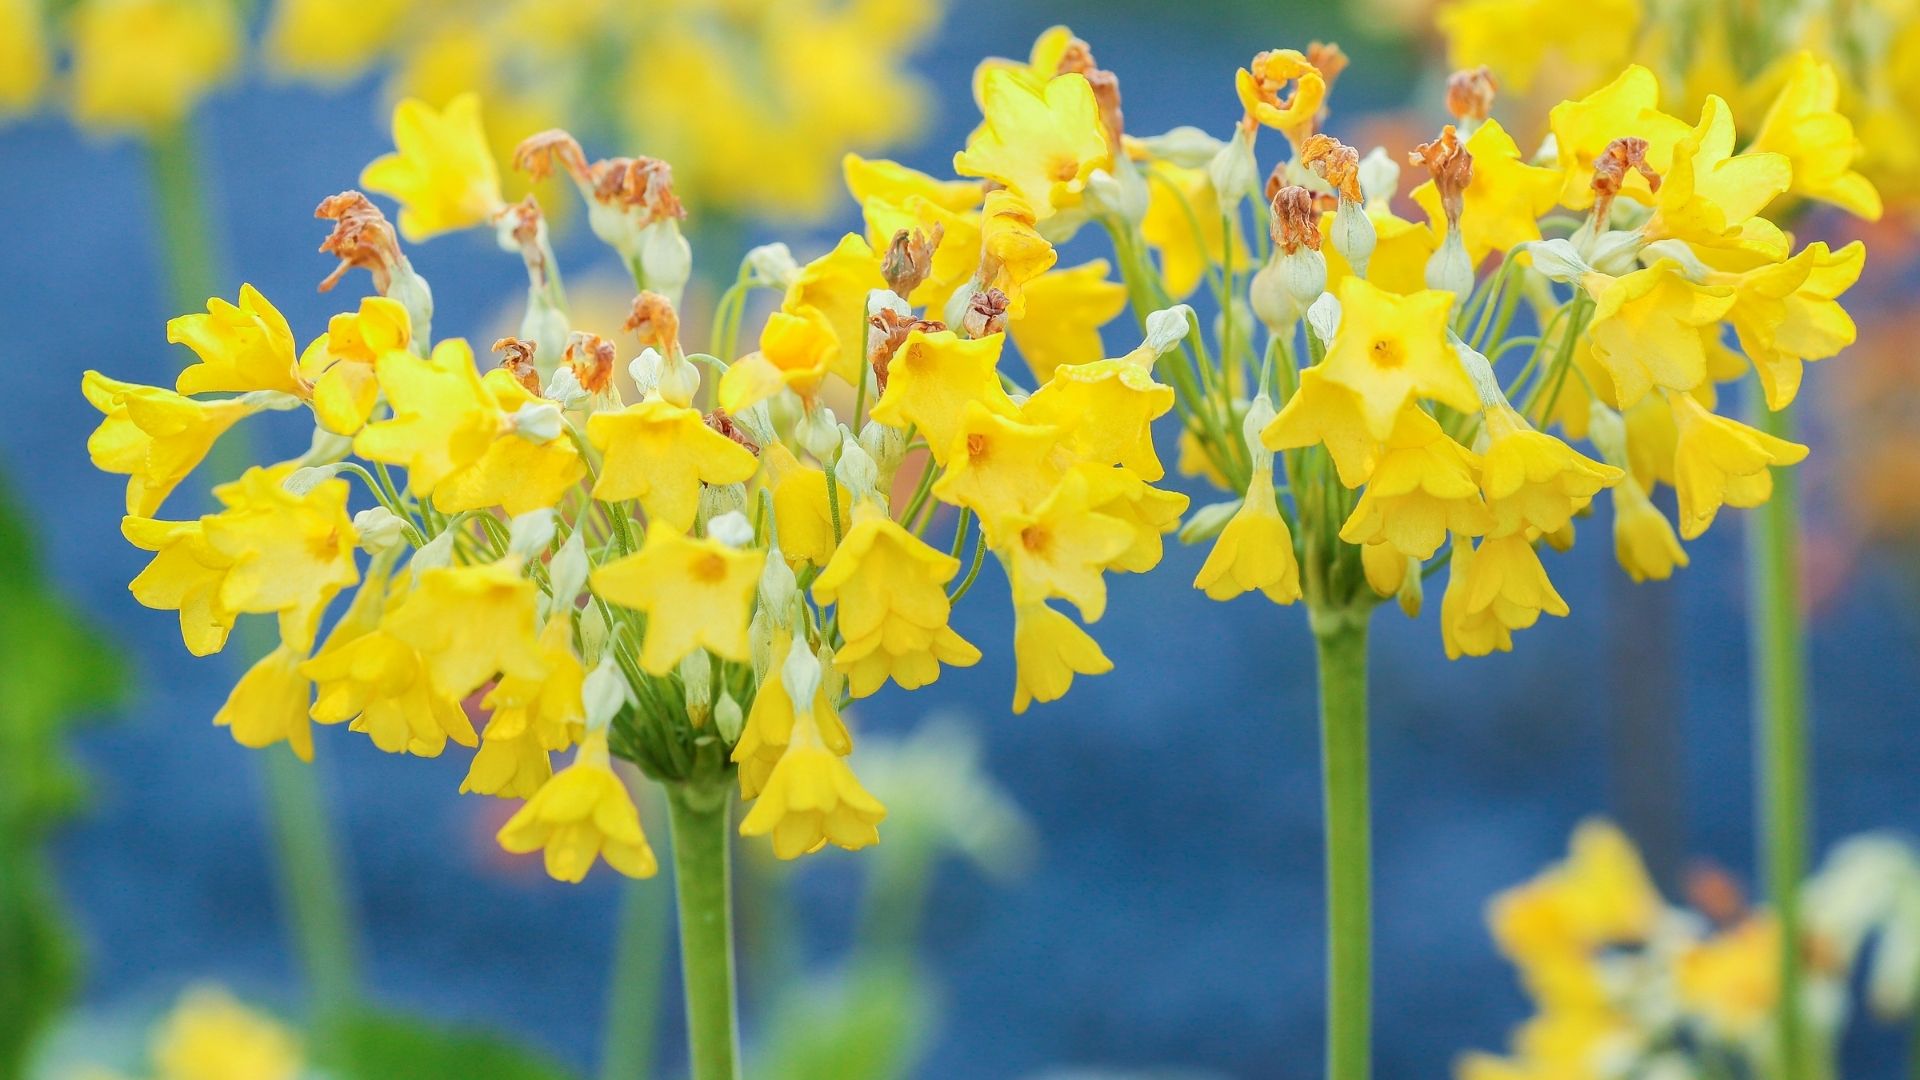 do cowslips have any connection to cows or is it just a name similarity